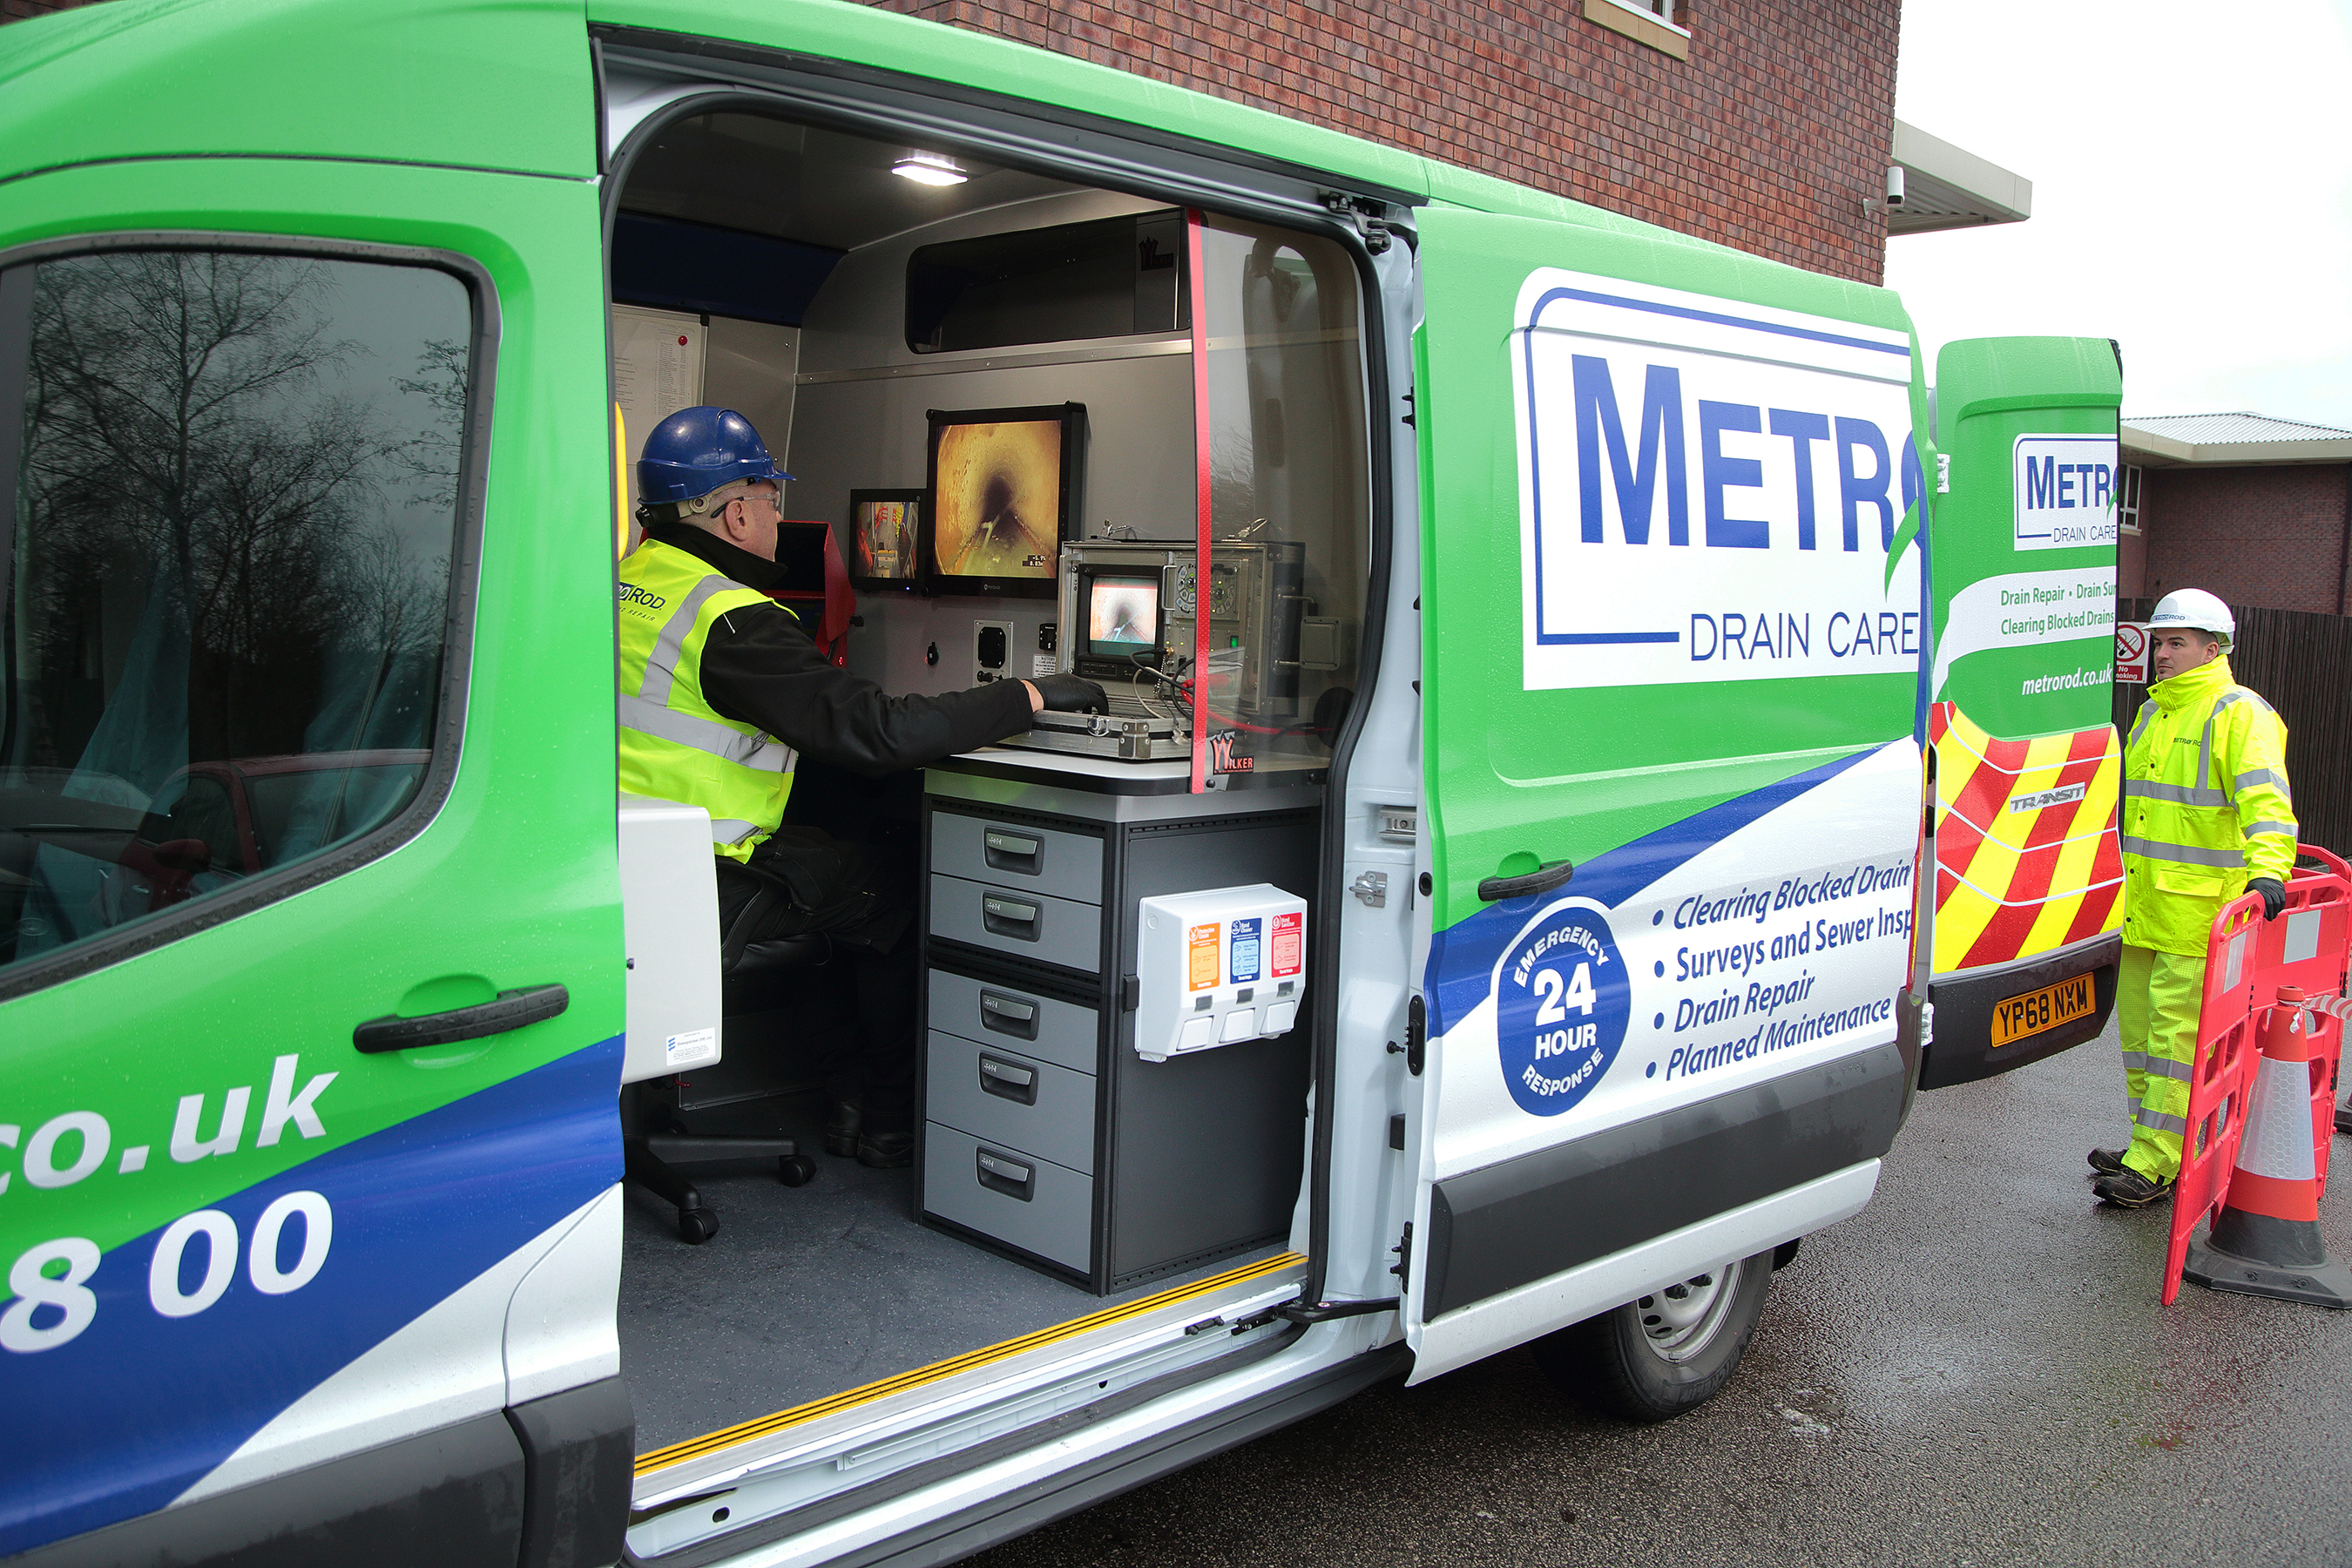 What Is A Cctv Survey And Why Do I Need One? – Metro Rod York